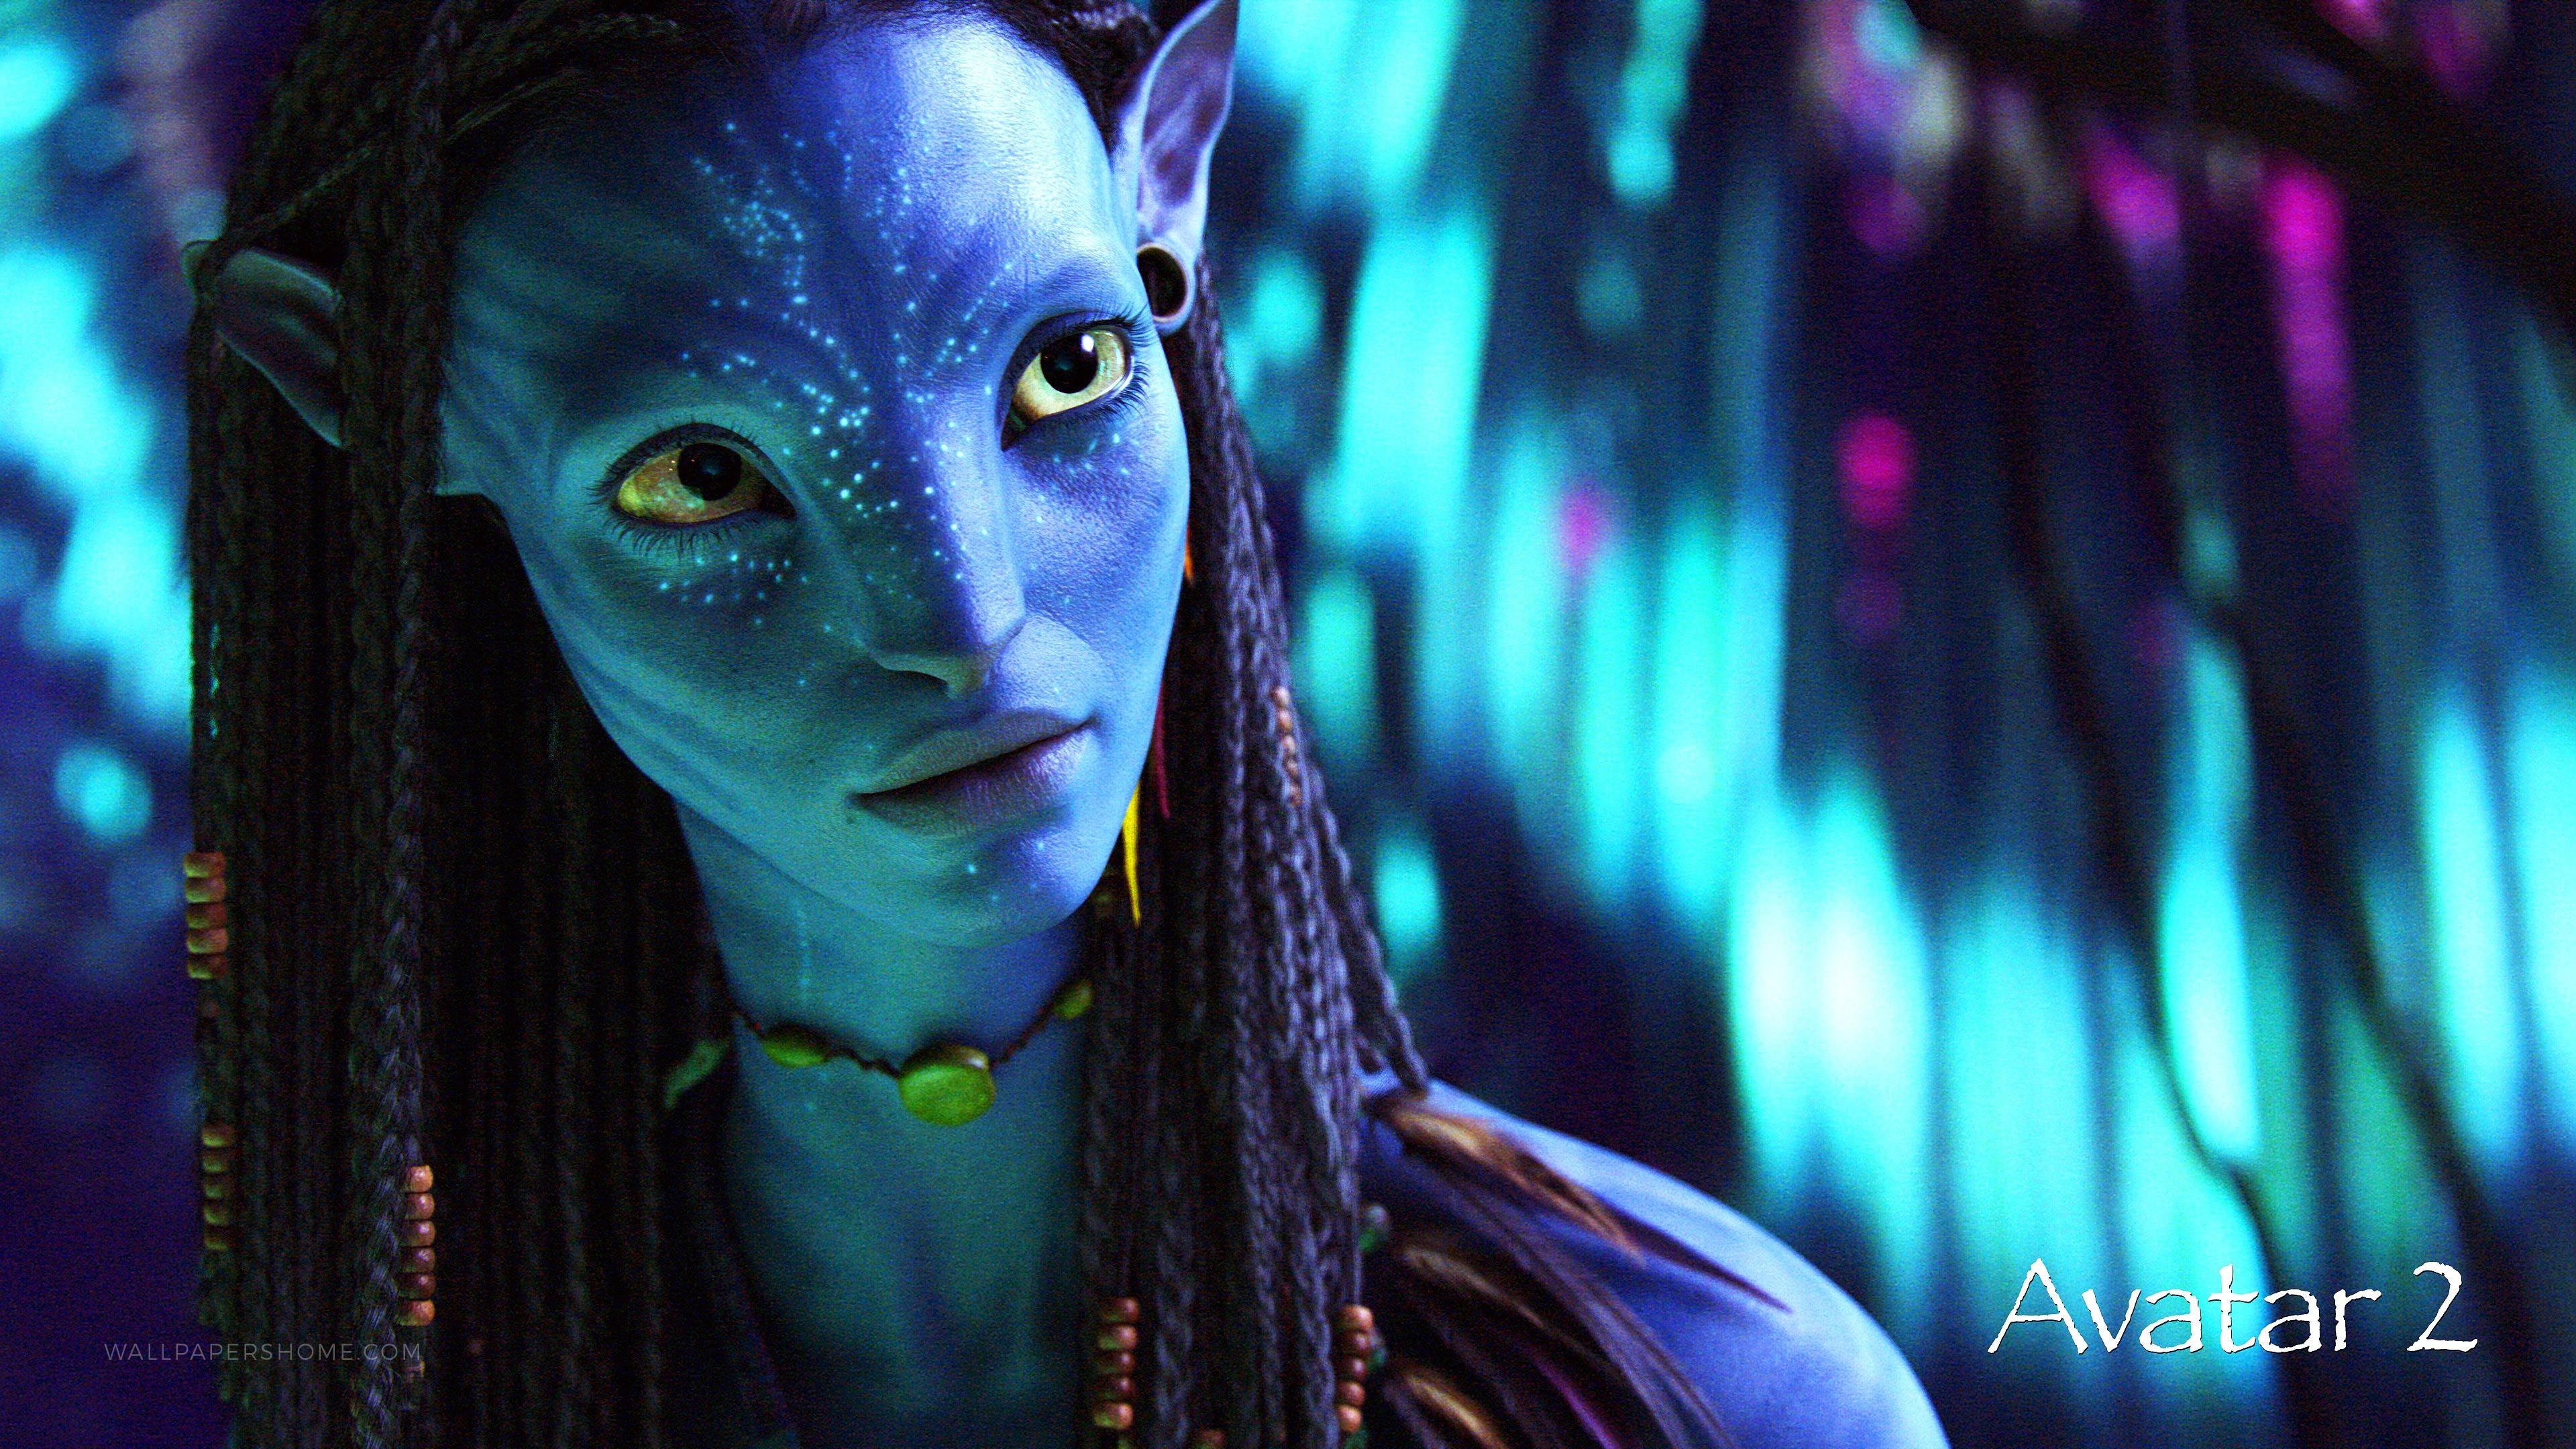 Avatar 2 Wallpapers Top Free Avatar 2 Backgrounds Wallpaperaccess 2707